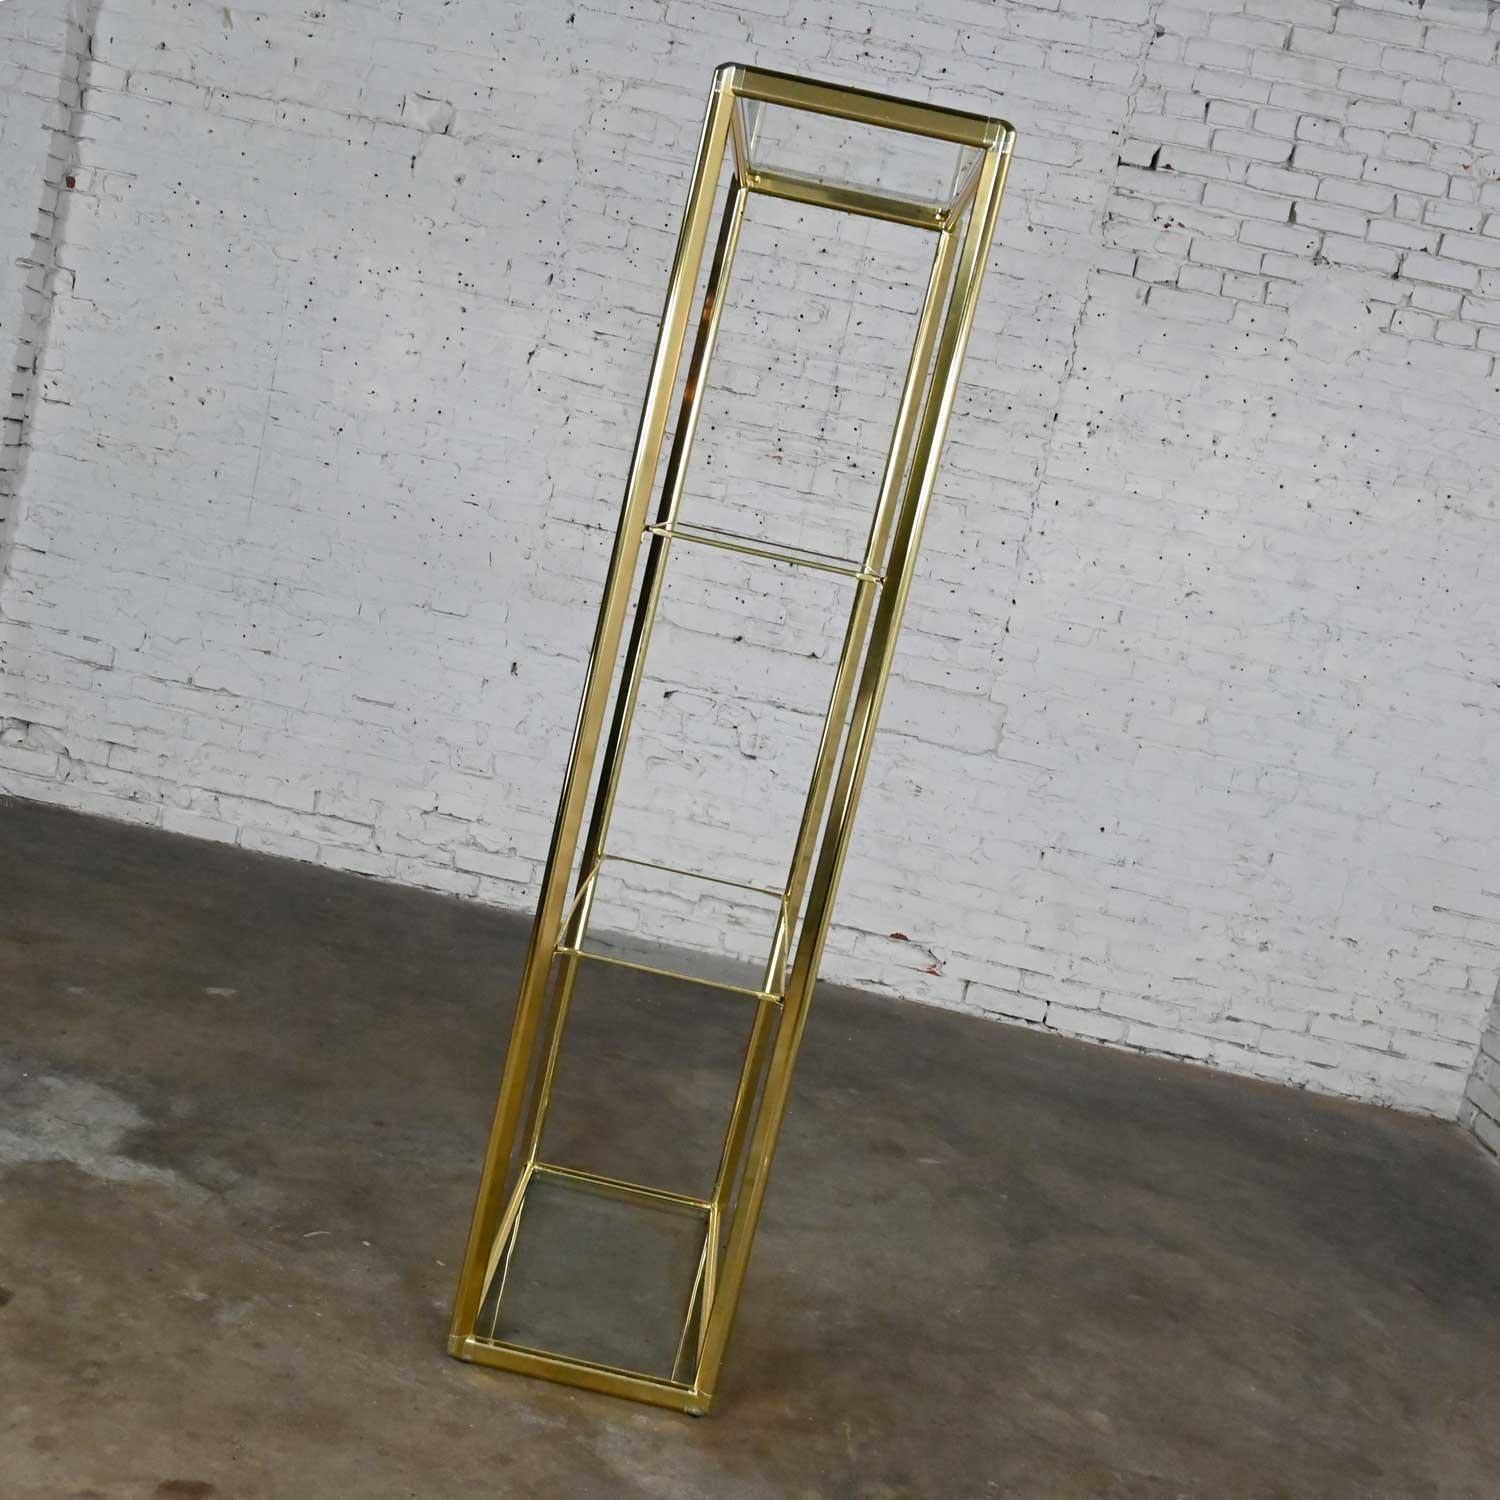 Vintage Modern Brass Plate & Glass Etagere Style DIA Design Institute of America In Good Condition For Sale In Topeka, KS